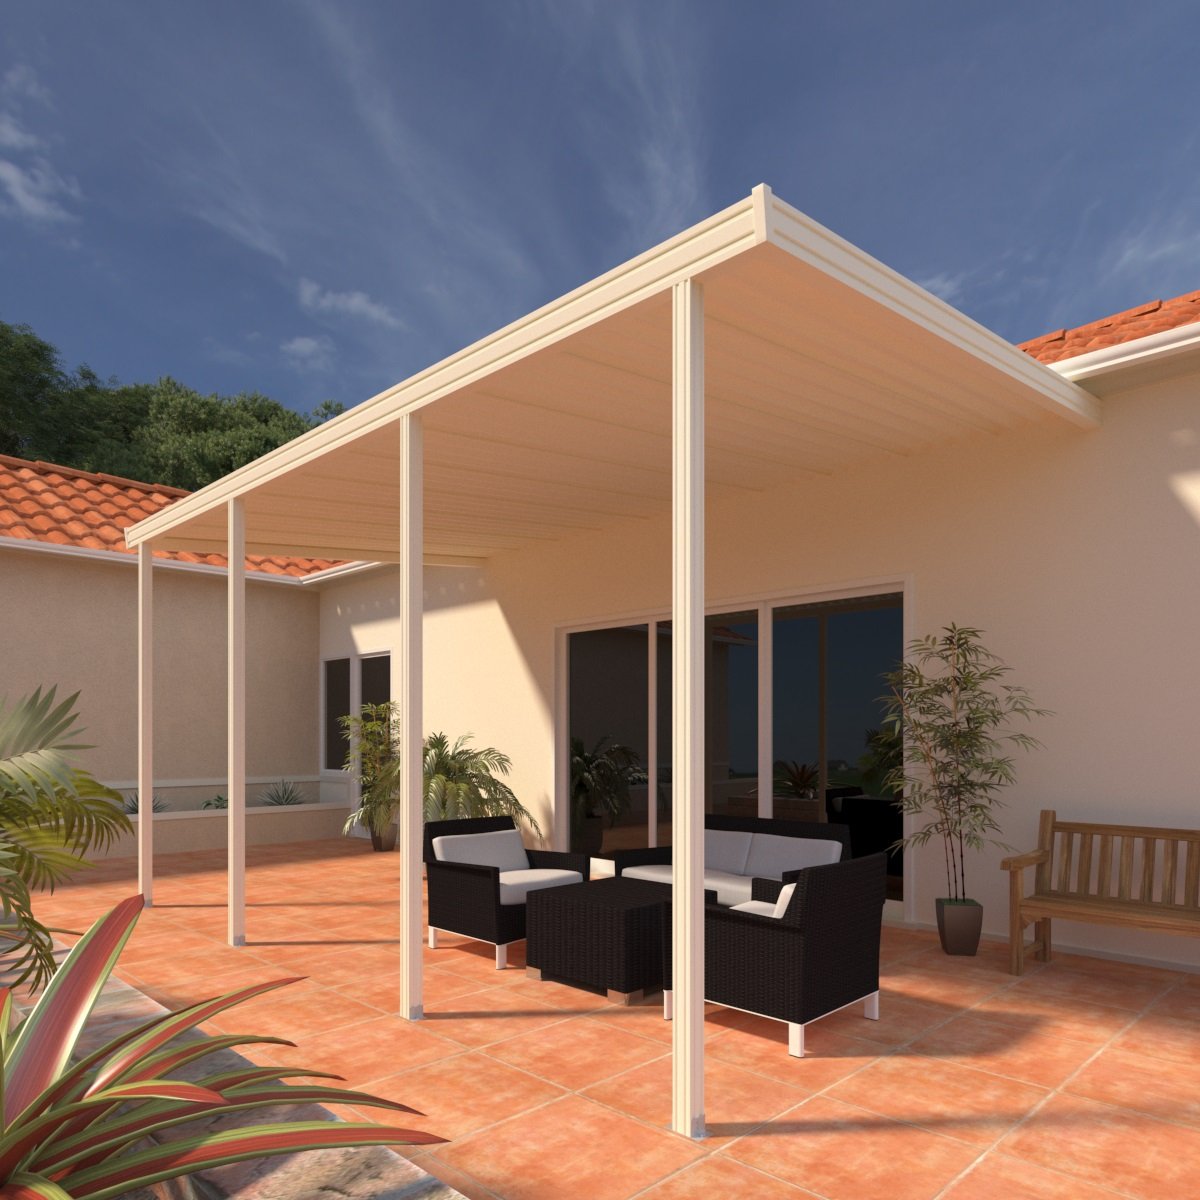 12 ft. Deep x 20 ft. Wide Ivory Attached Aluminum Patio Cover -4 Posts - (20lb Low/Medium Snow Area)